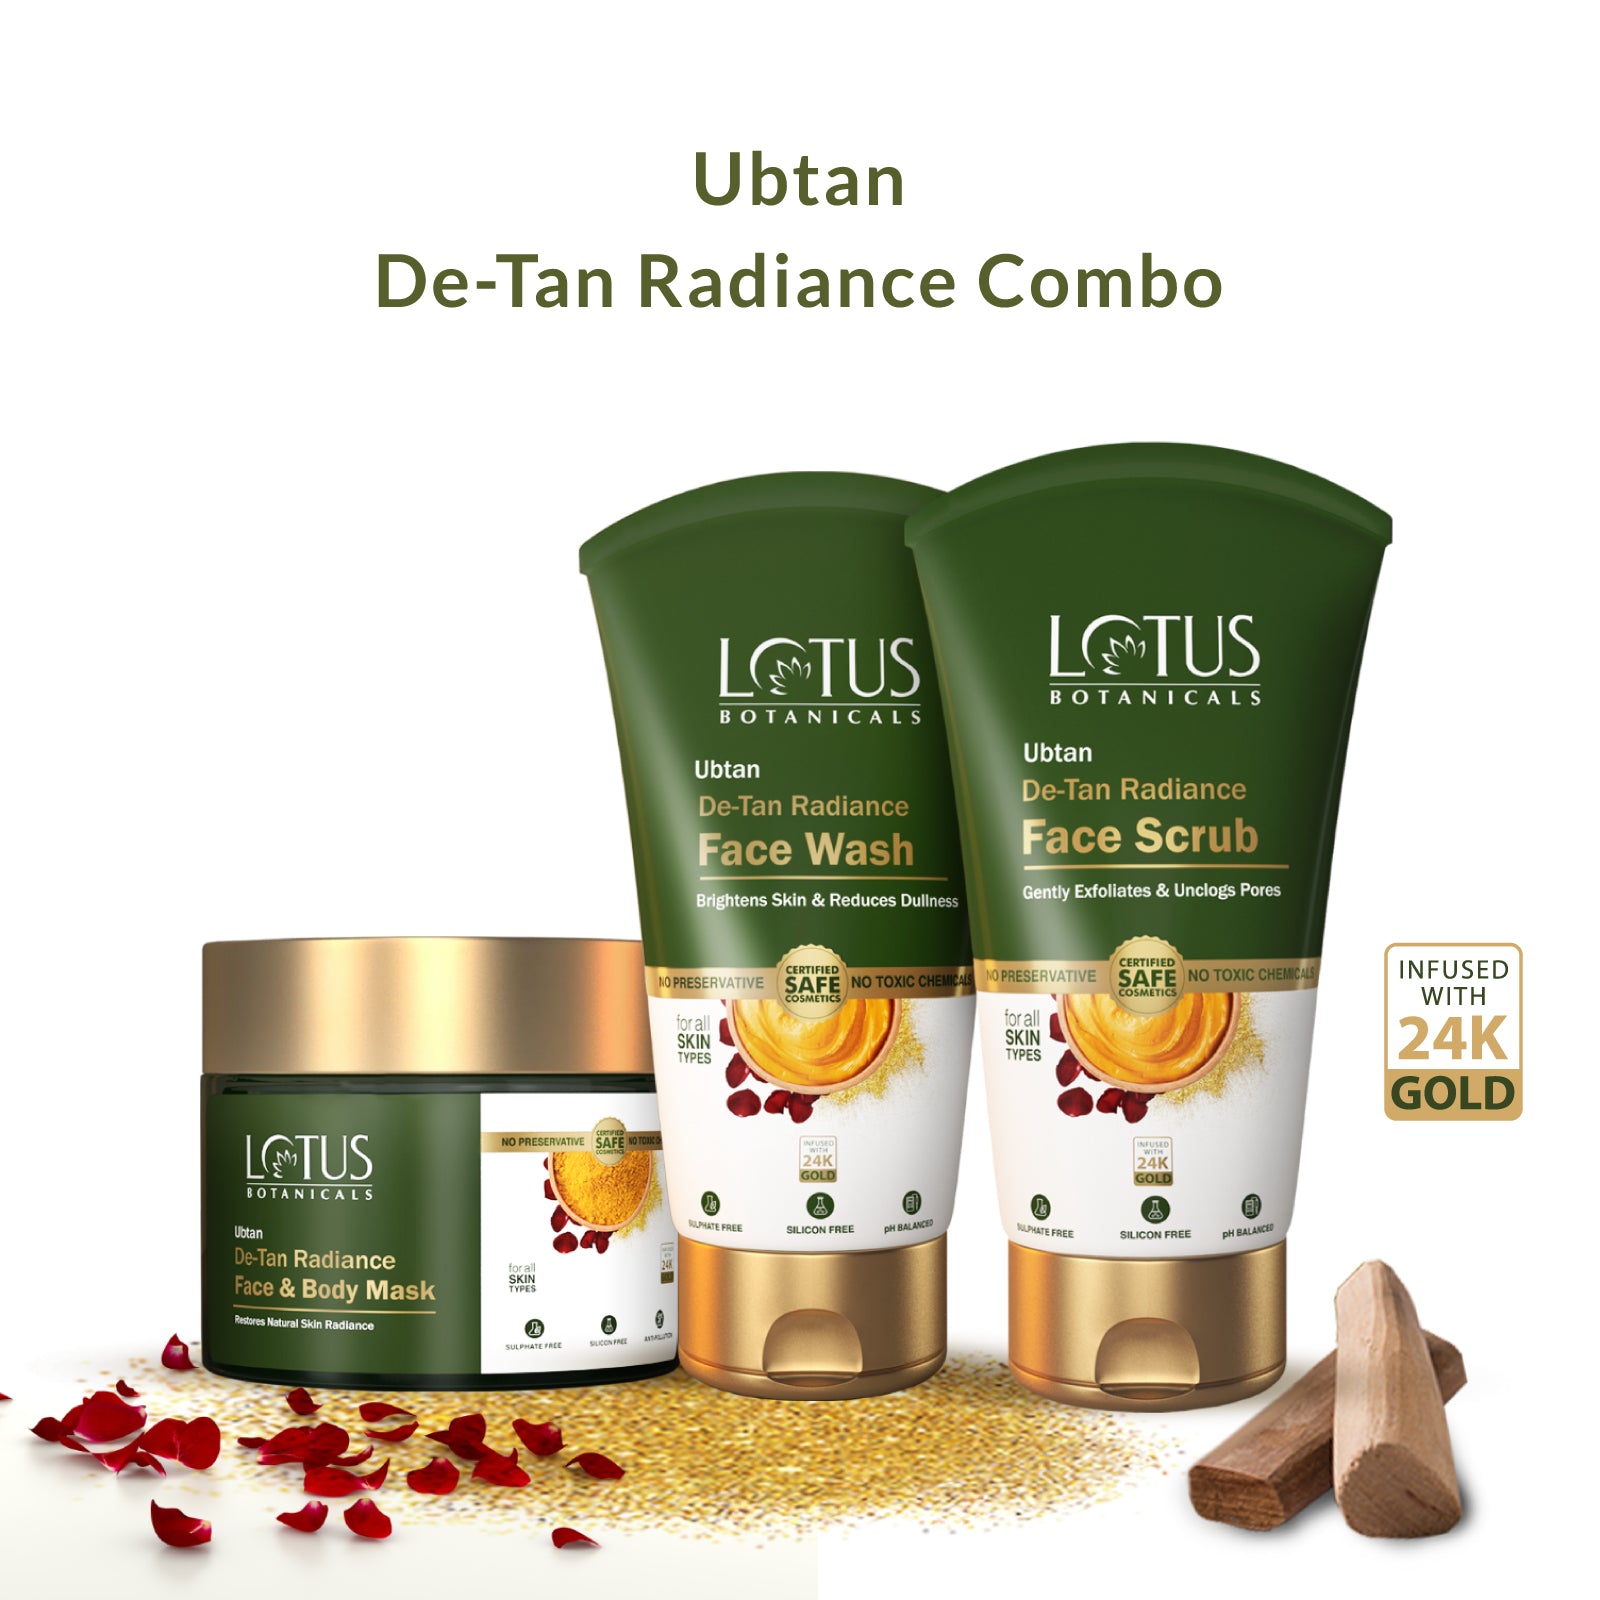 Ubtan De-Tan Radiance Combo - Natural skincare products for glowing and tan-free skin